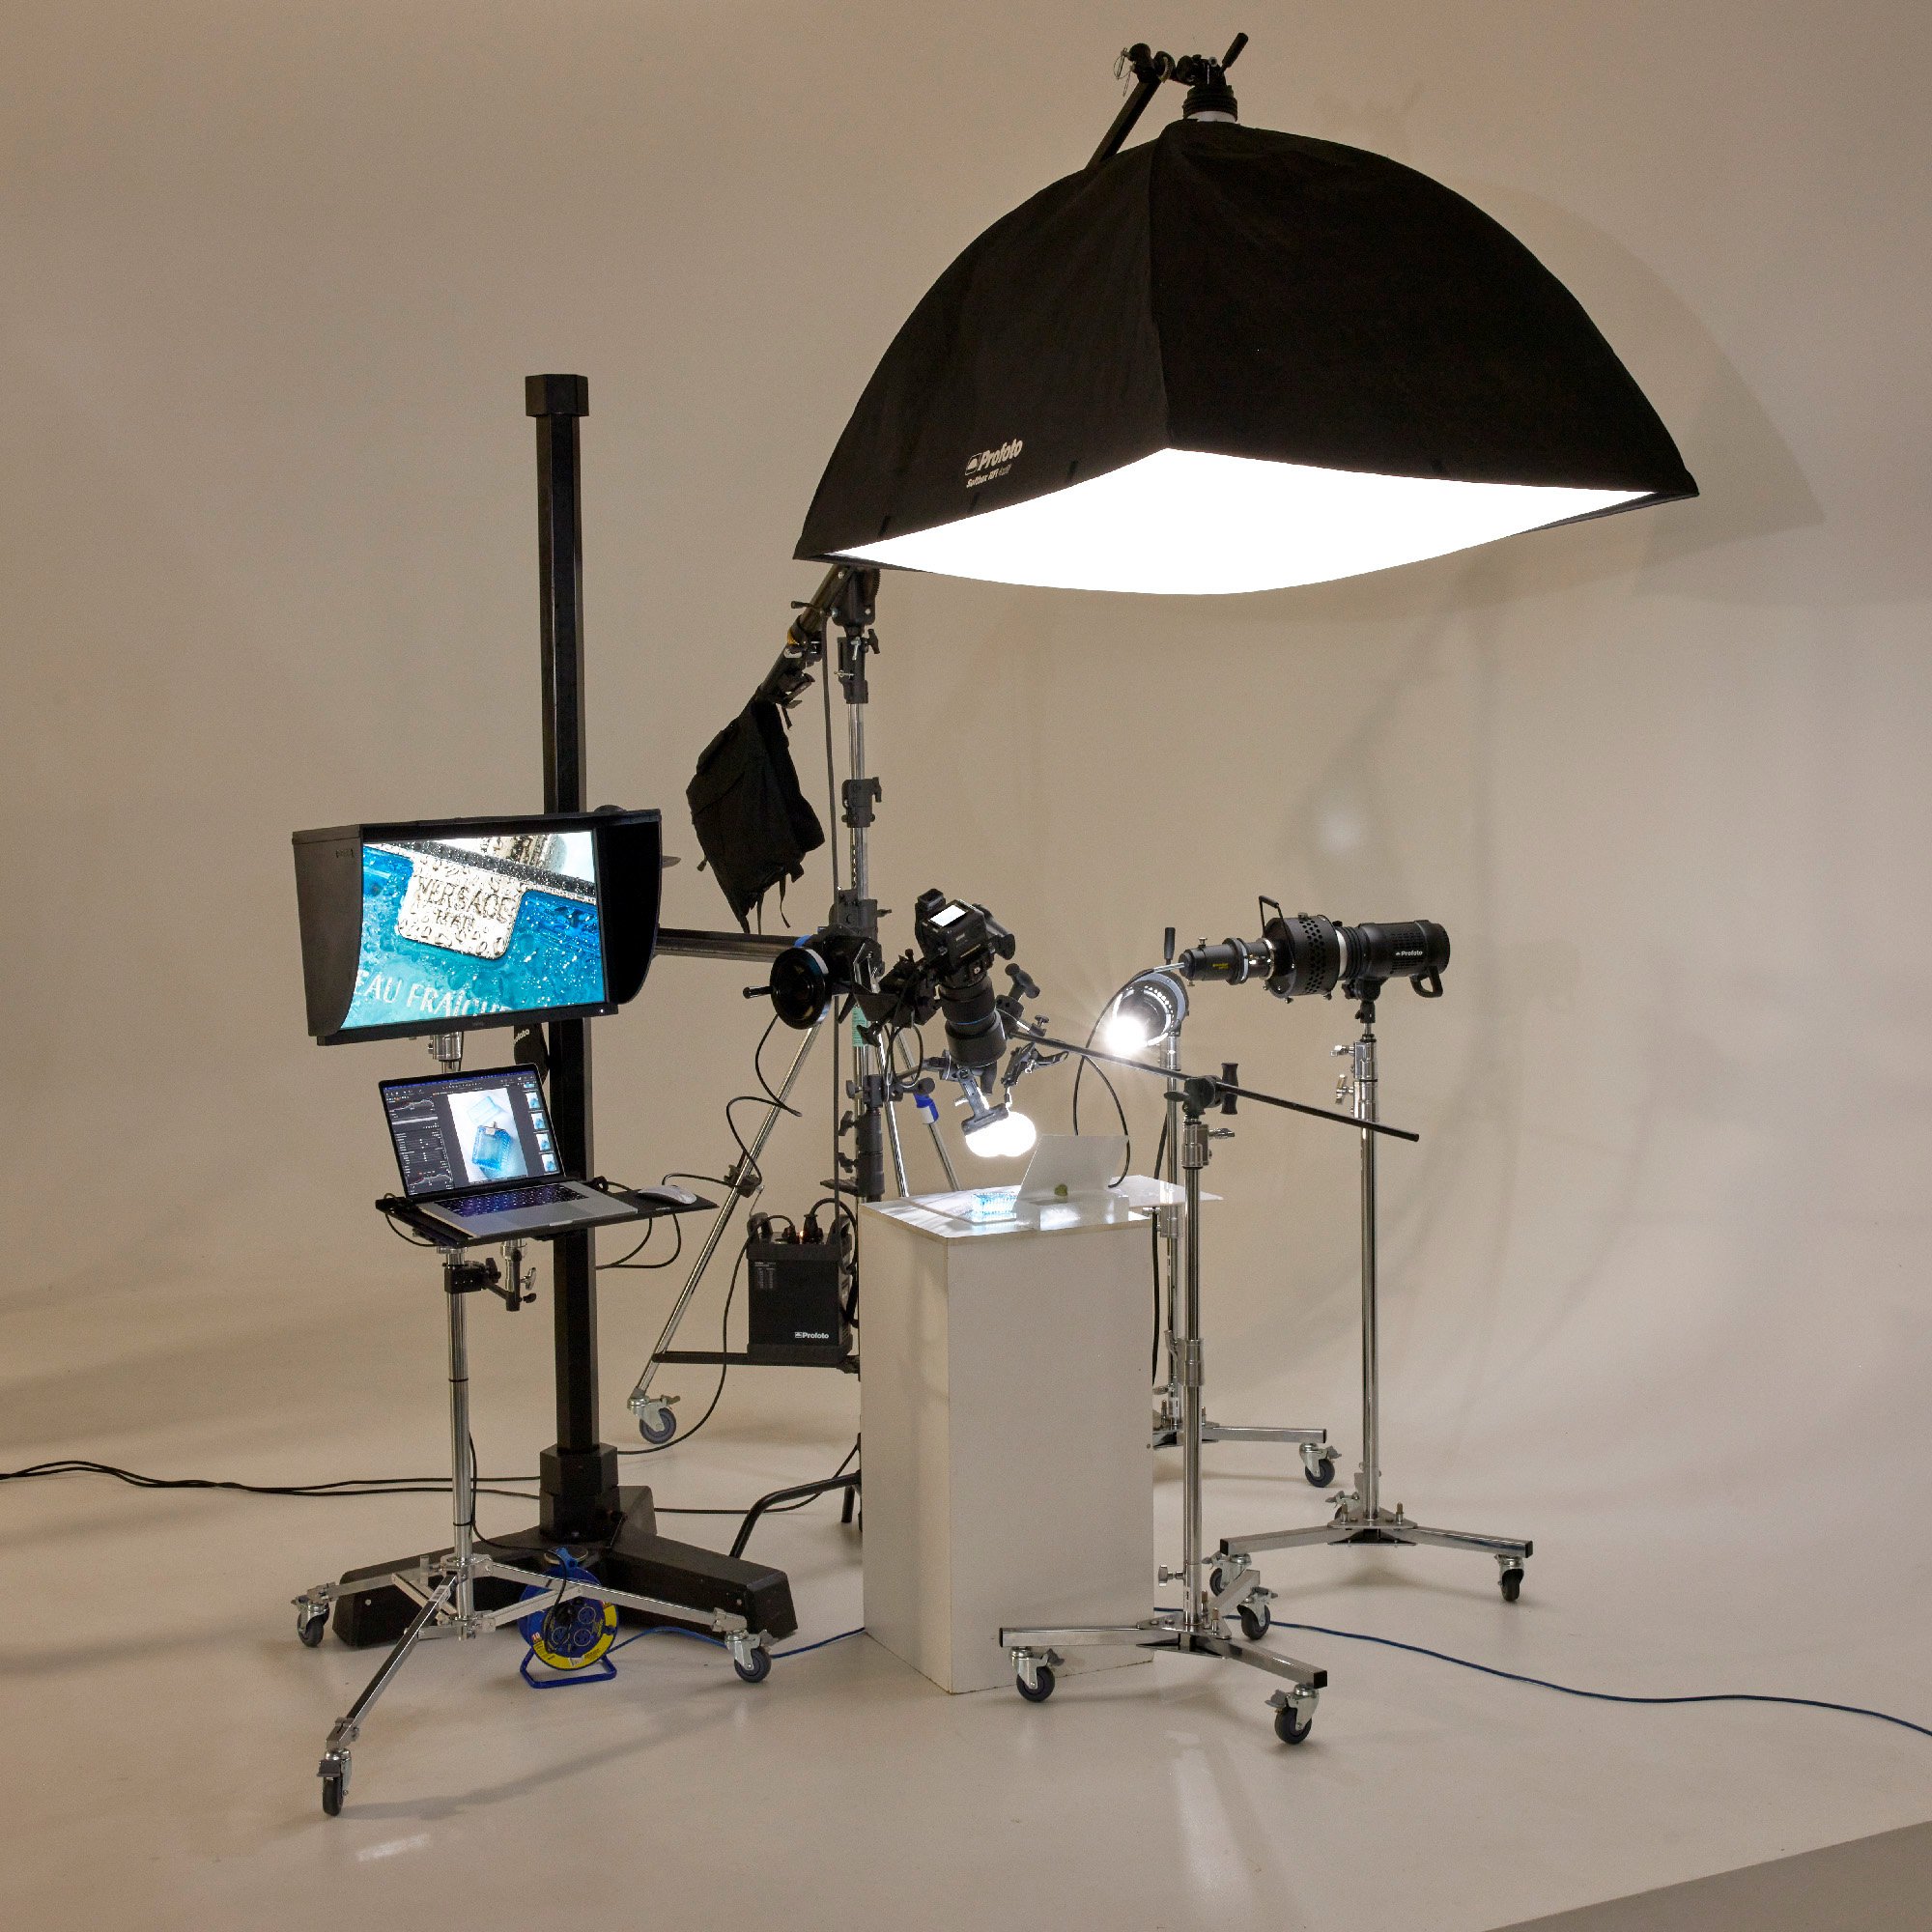 The complete set up with monitor moved into position close to the camera